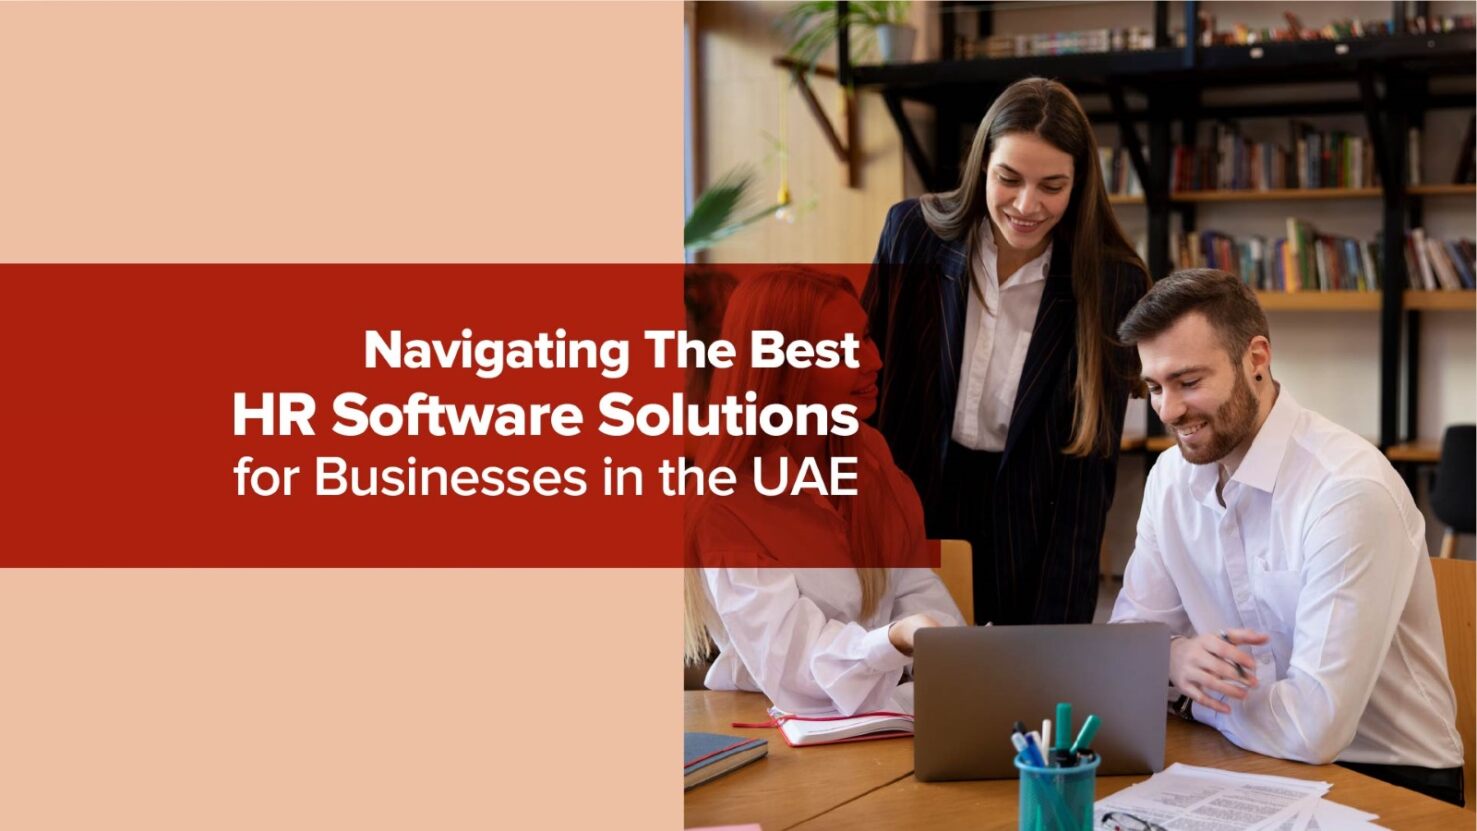 Navigating the Best HR Software Solutions for Businesses in the UAE